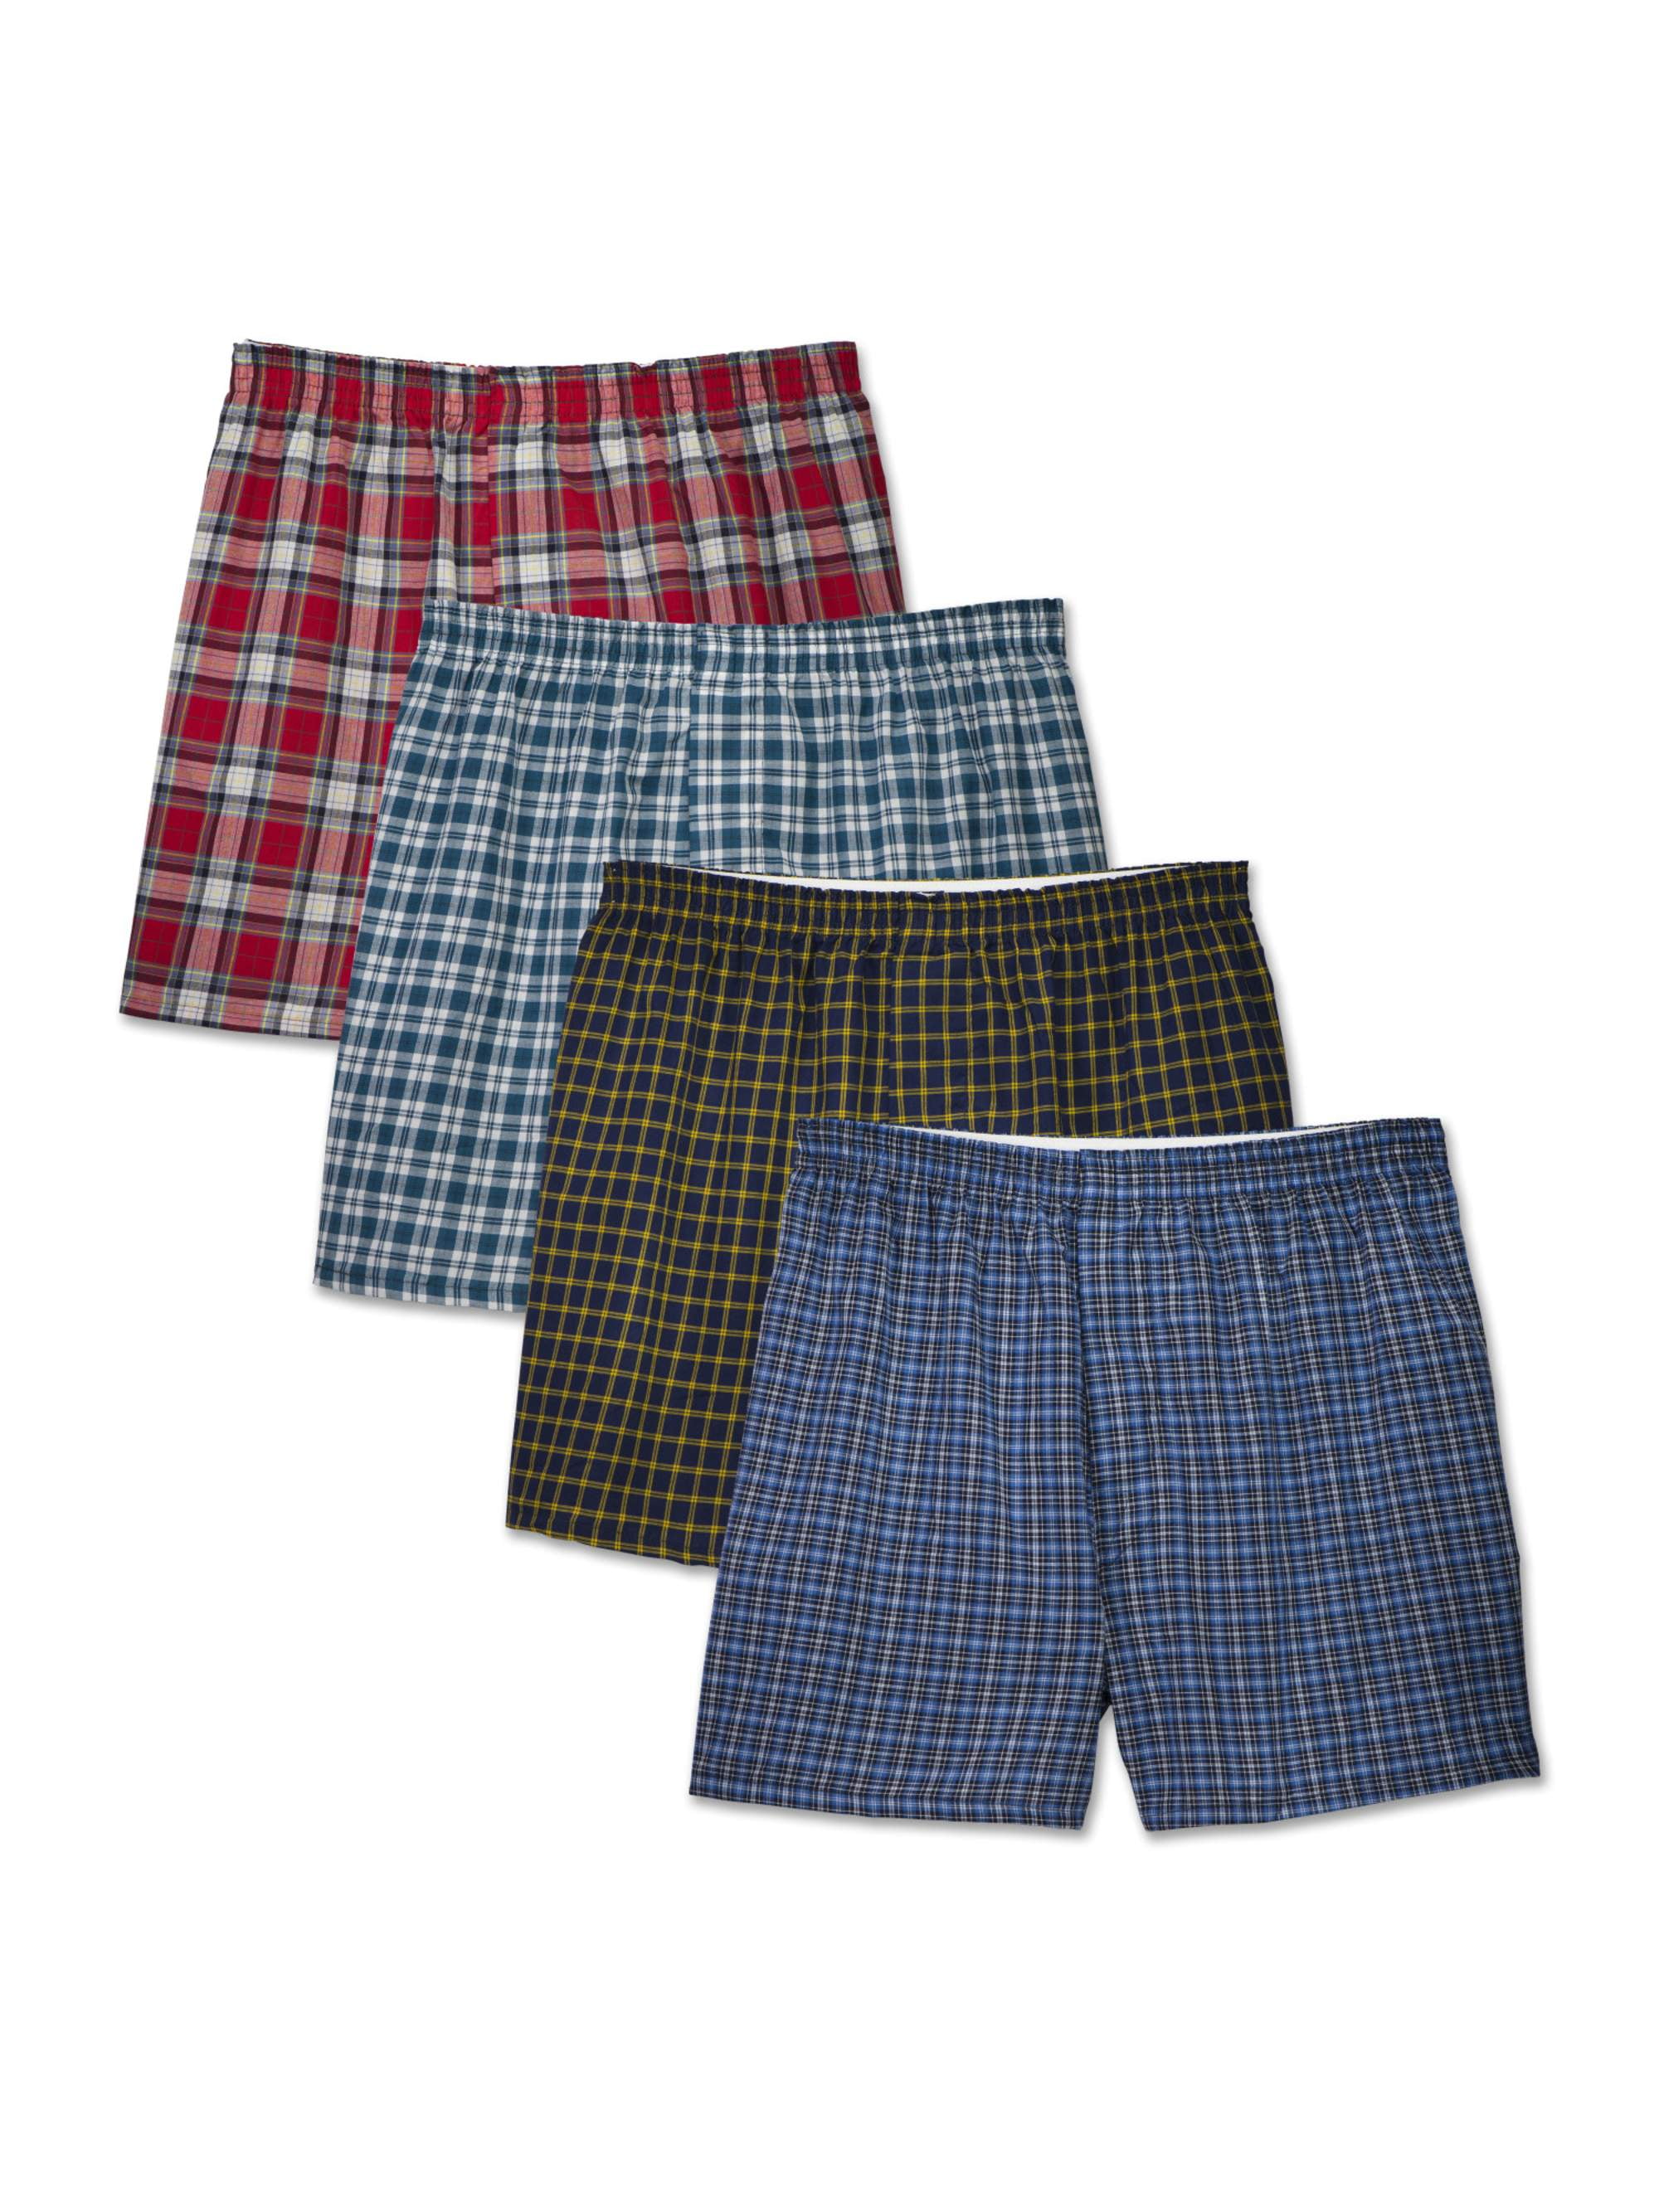 Fruit of the Loom Men's Woven Tartan Plaid Boxers, Extended Sizes, 4 ...